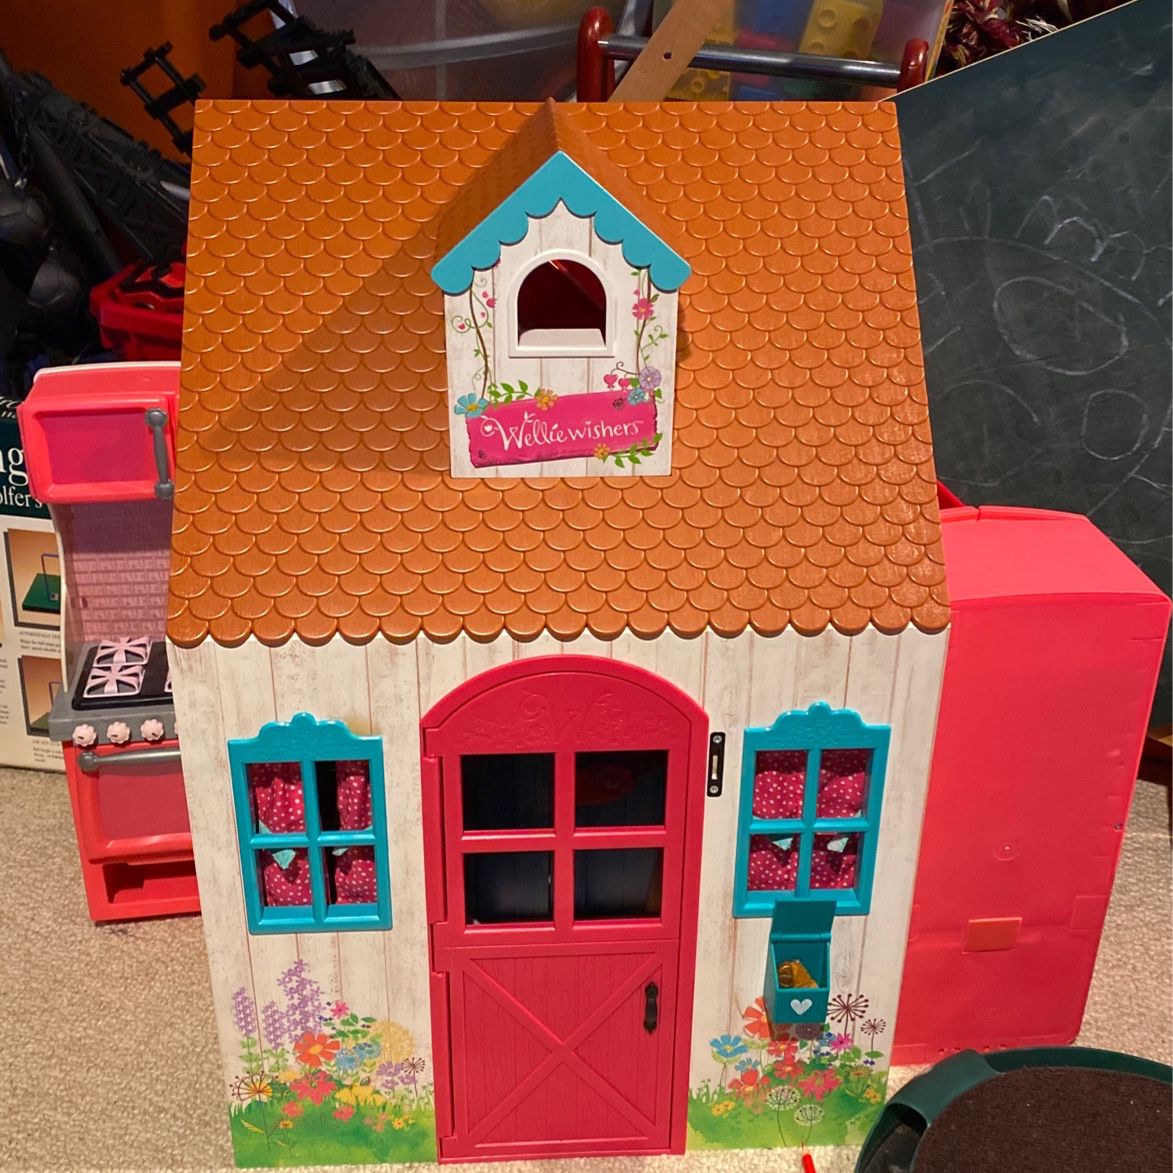 American Girl dollhouse for Welliewishers